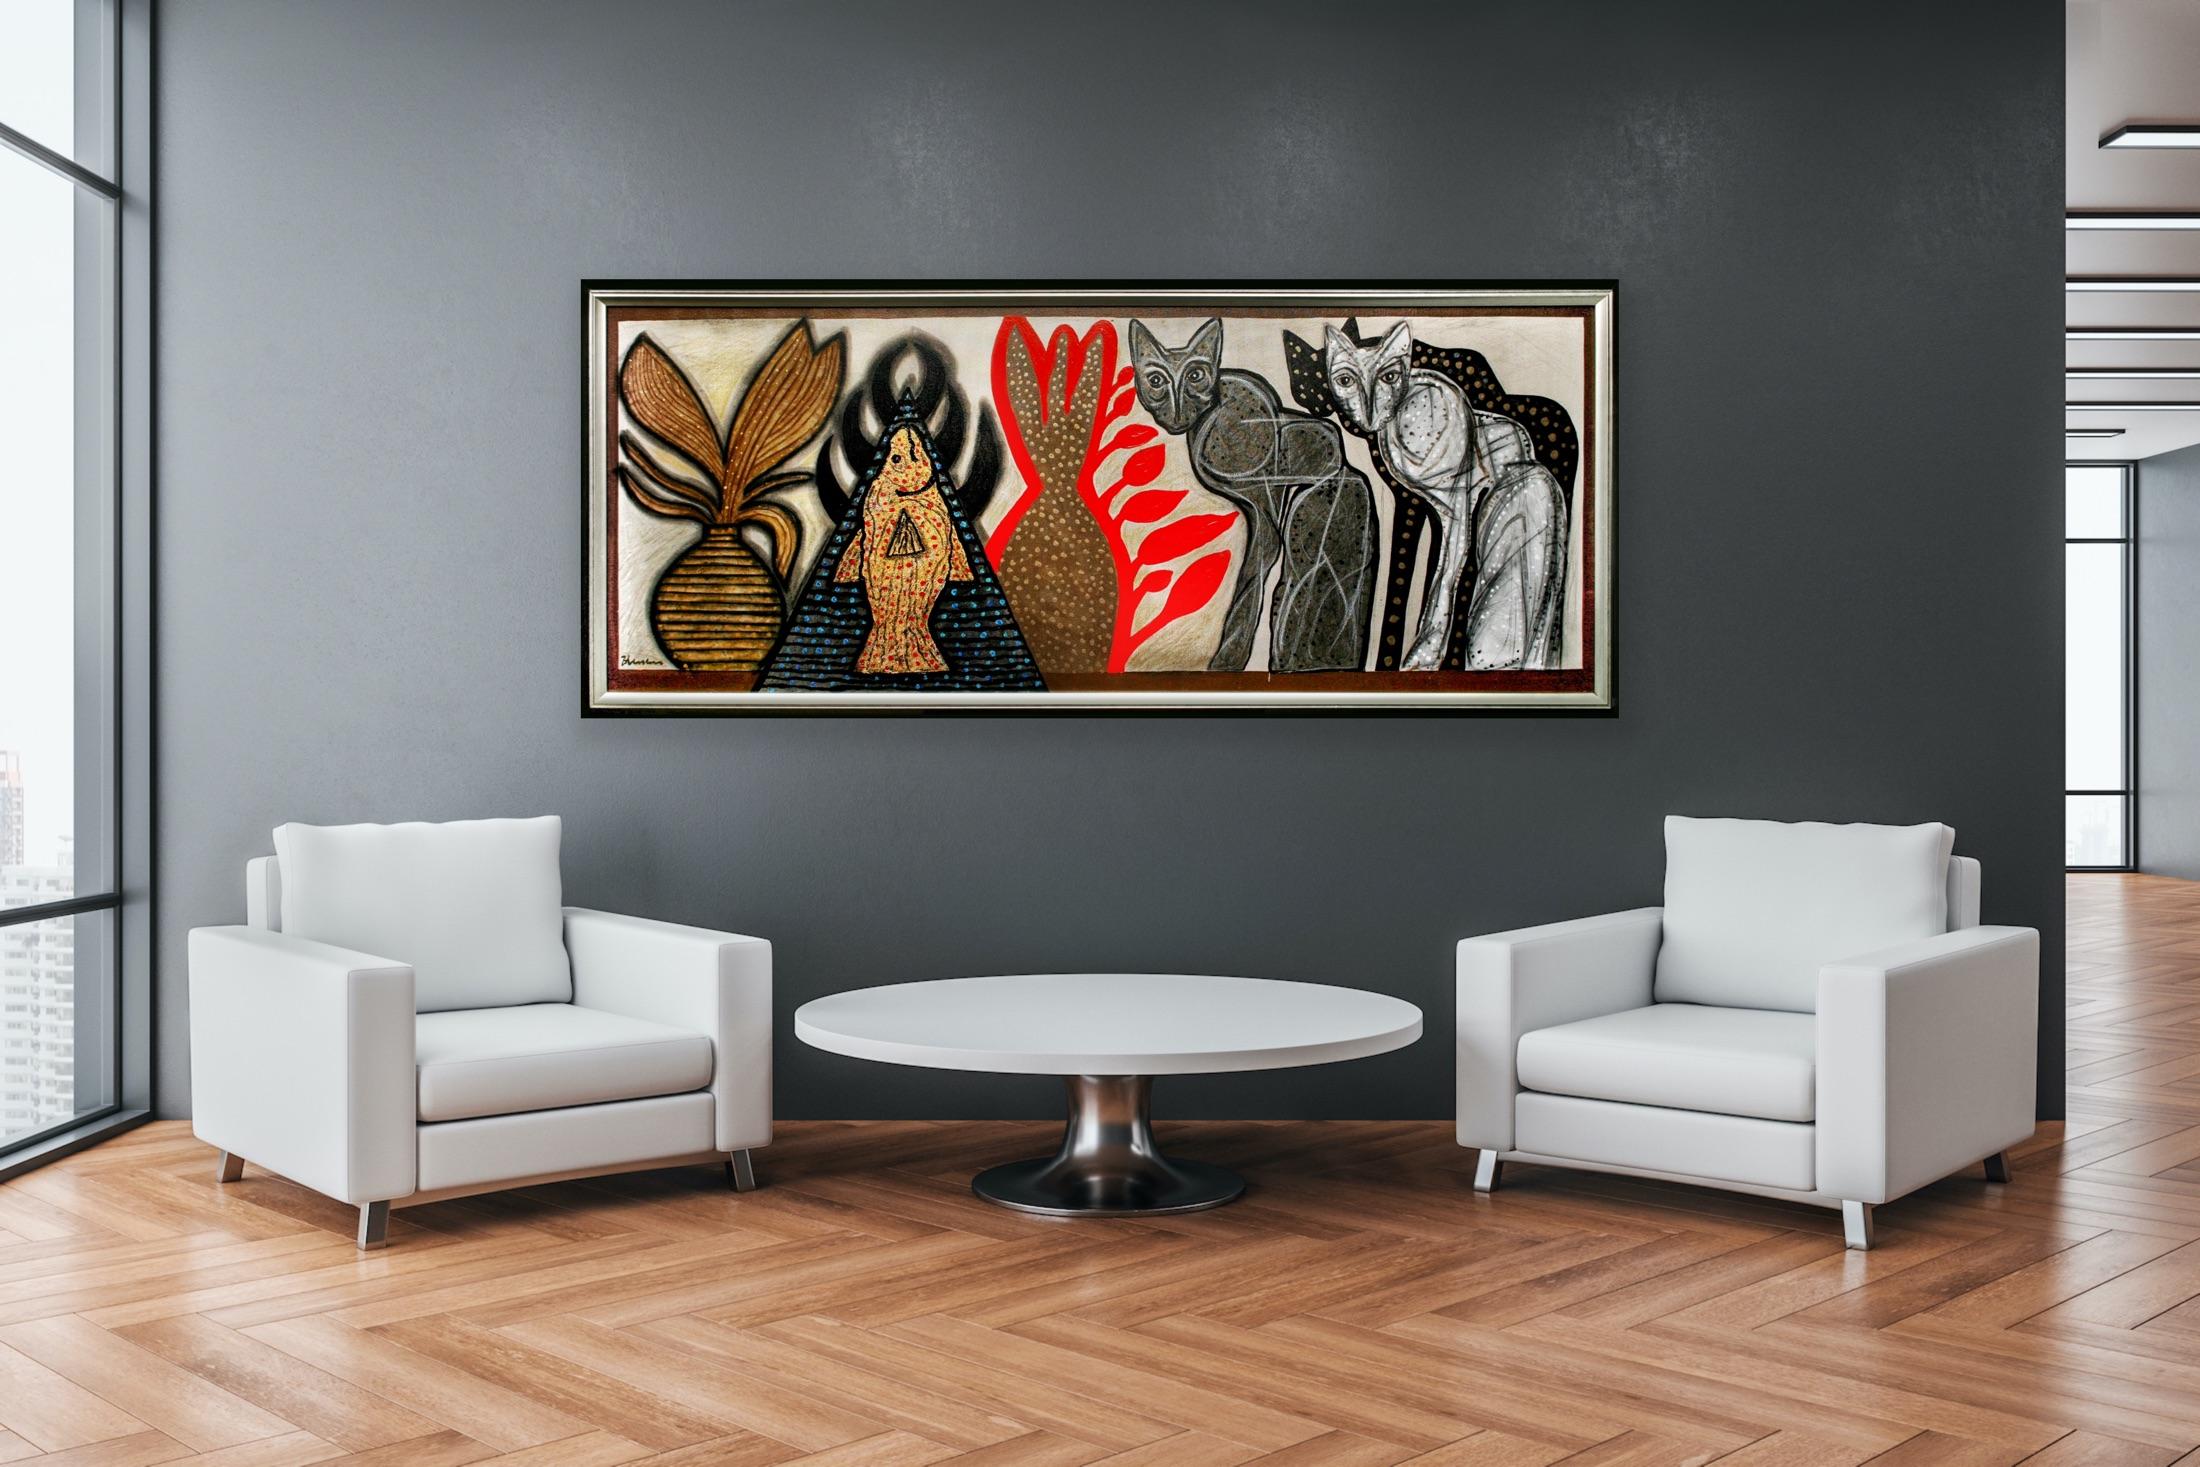 Modern Meets Retro Indian Art Madras, Cool Eclectic Cats Canvas Painting   13